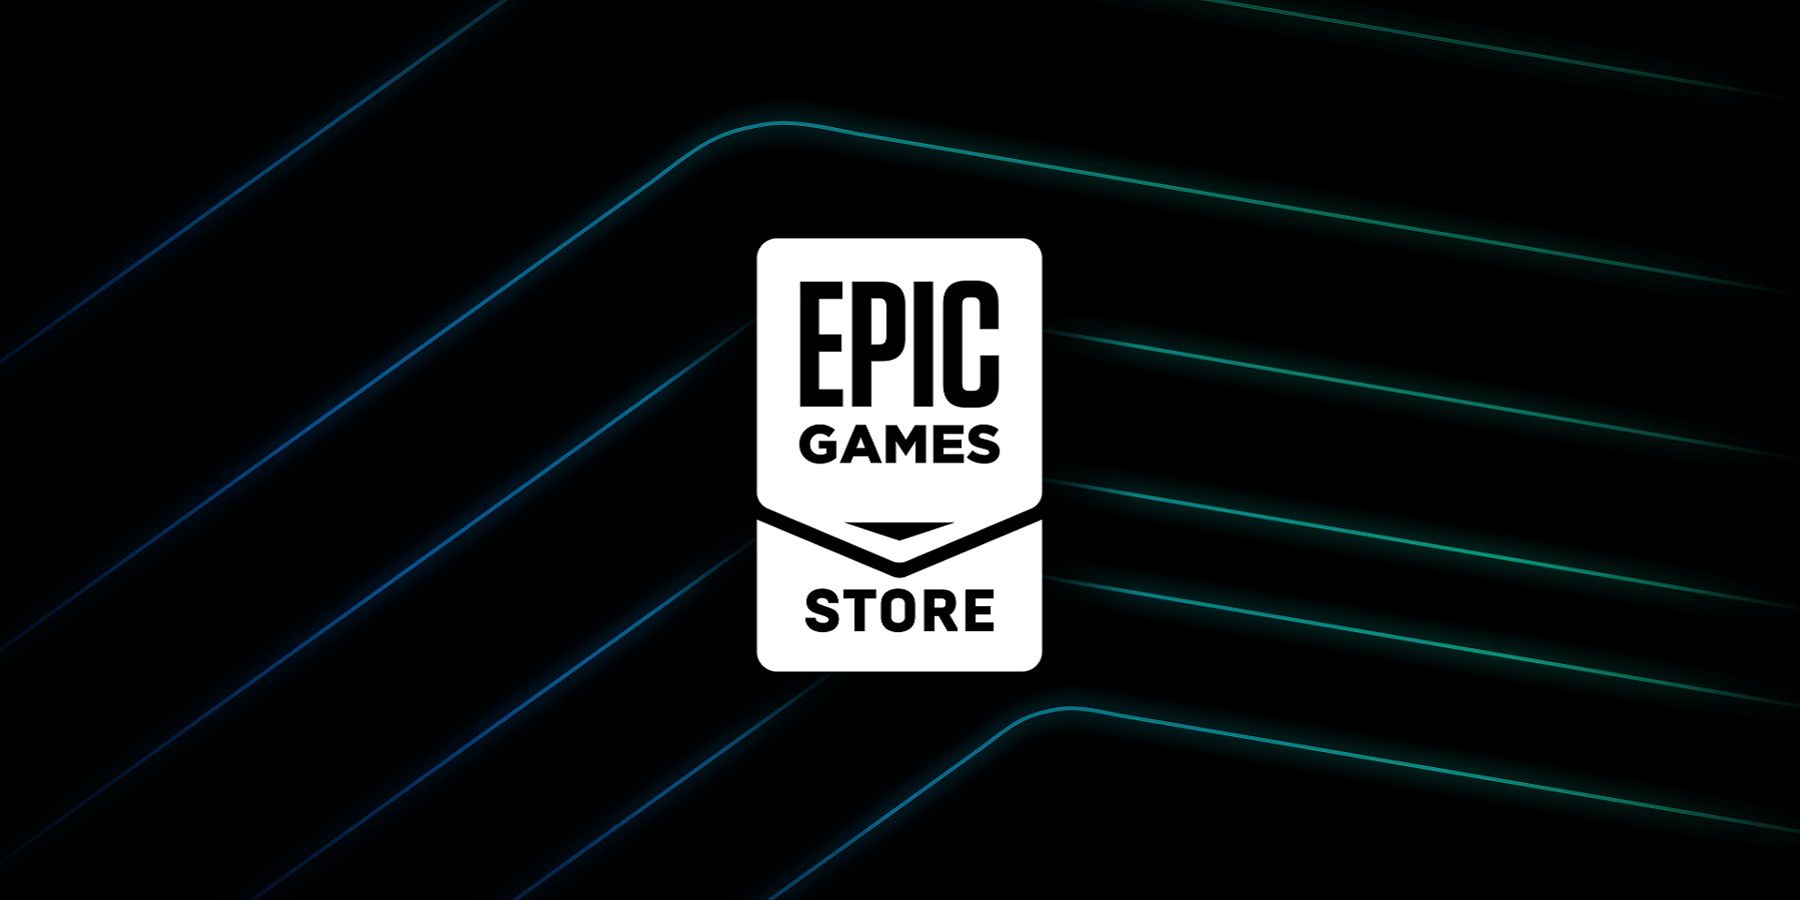 epic games store logo background